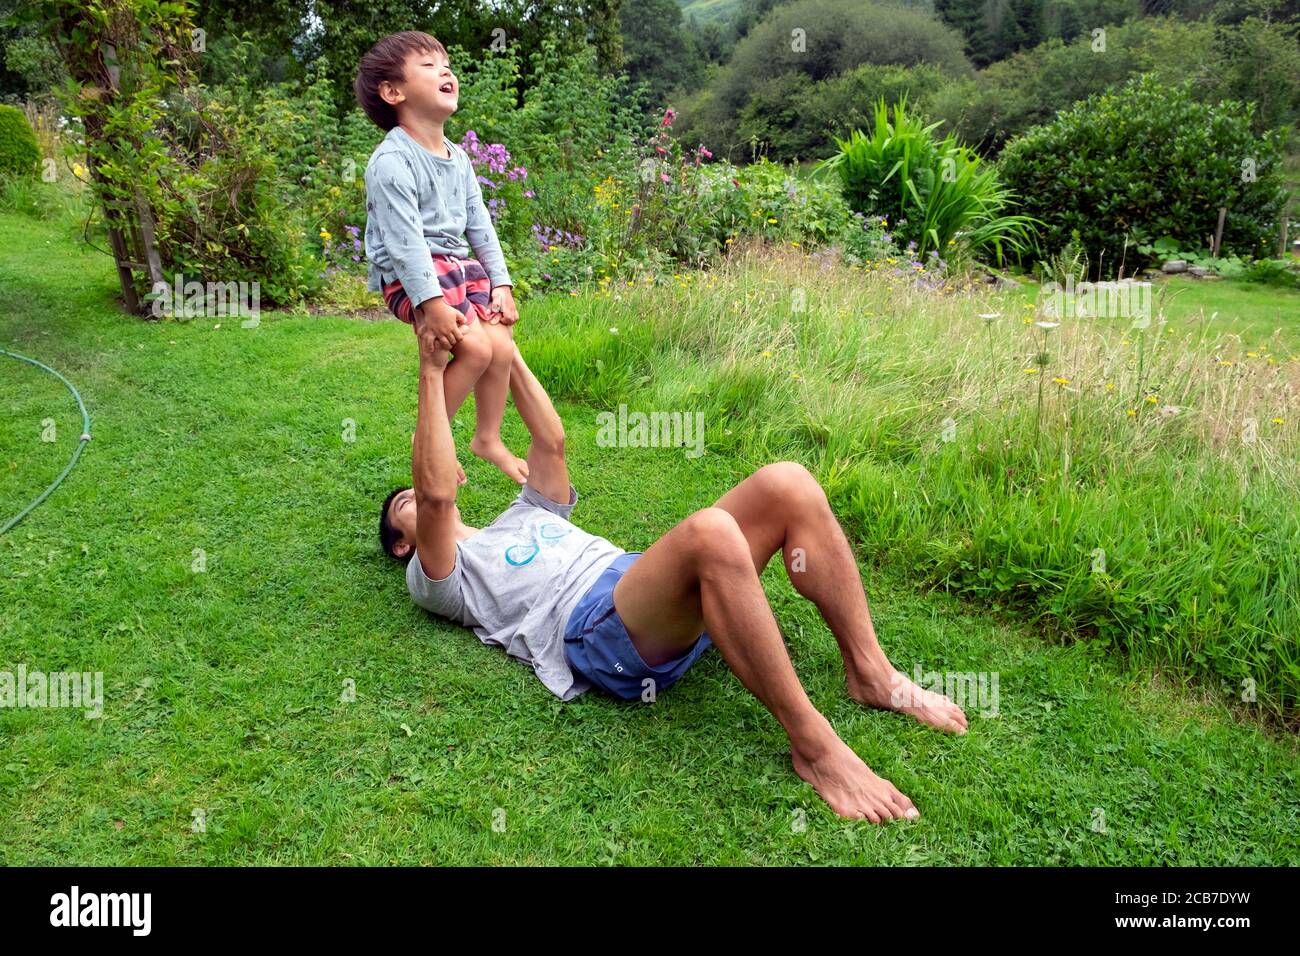 Father lying on the ground grass in country garden playing with balancing his 3 year old son child boy holding him in the air Wales UK KATHY DEWITT Stock Photo